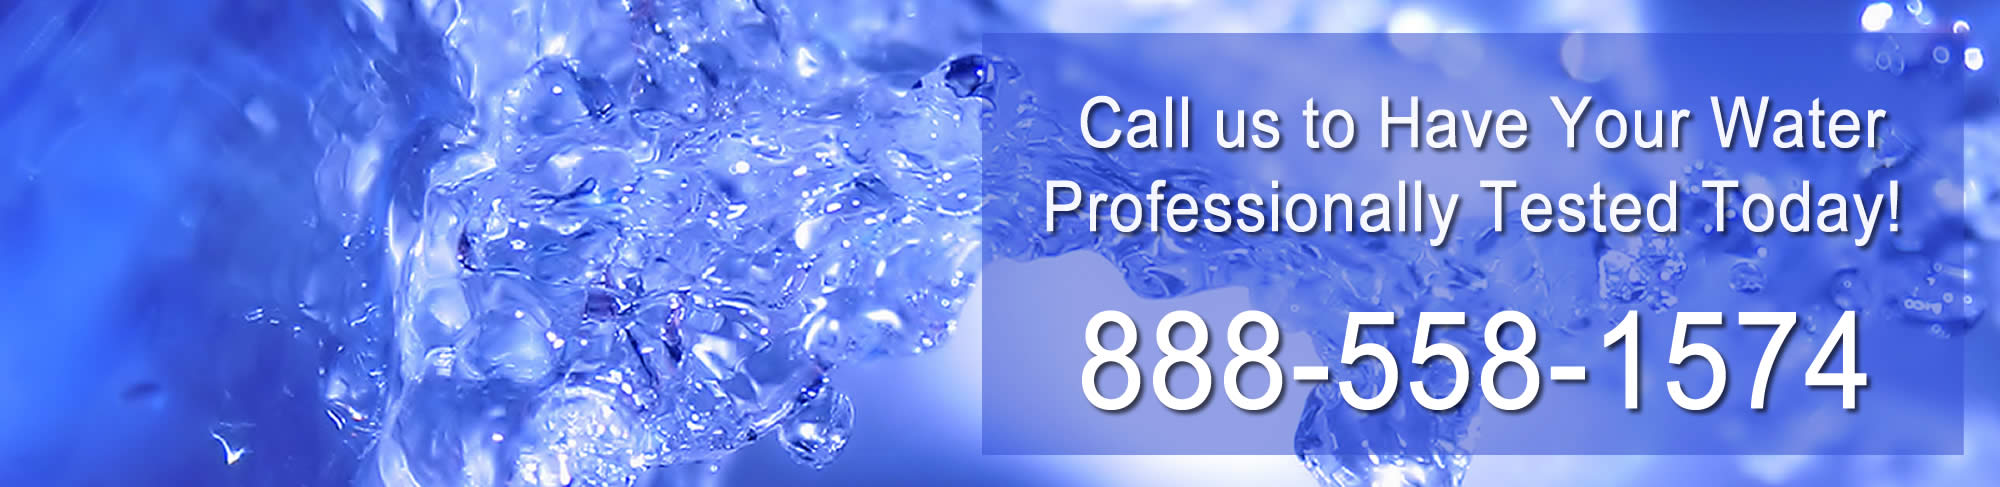 Specializing in Southington CT Water Testing and Analysis